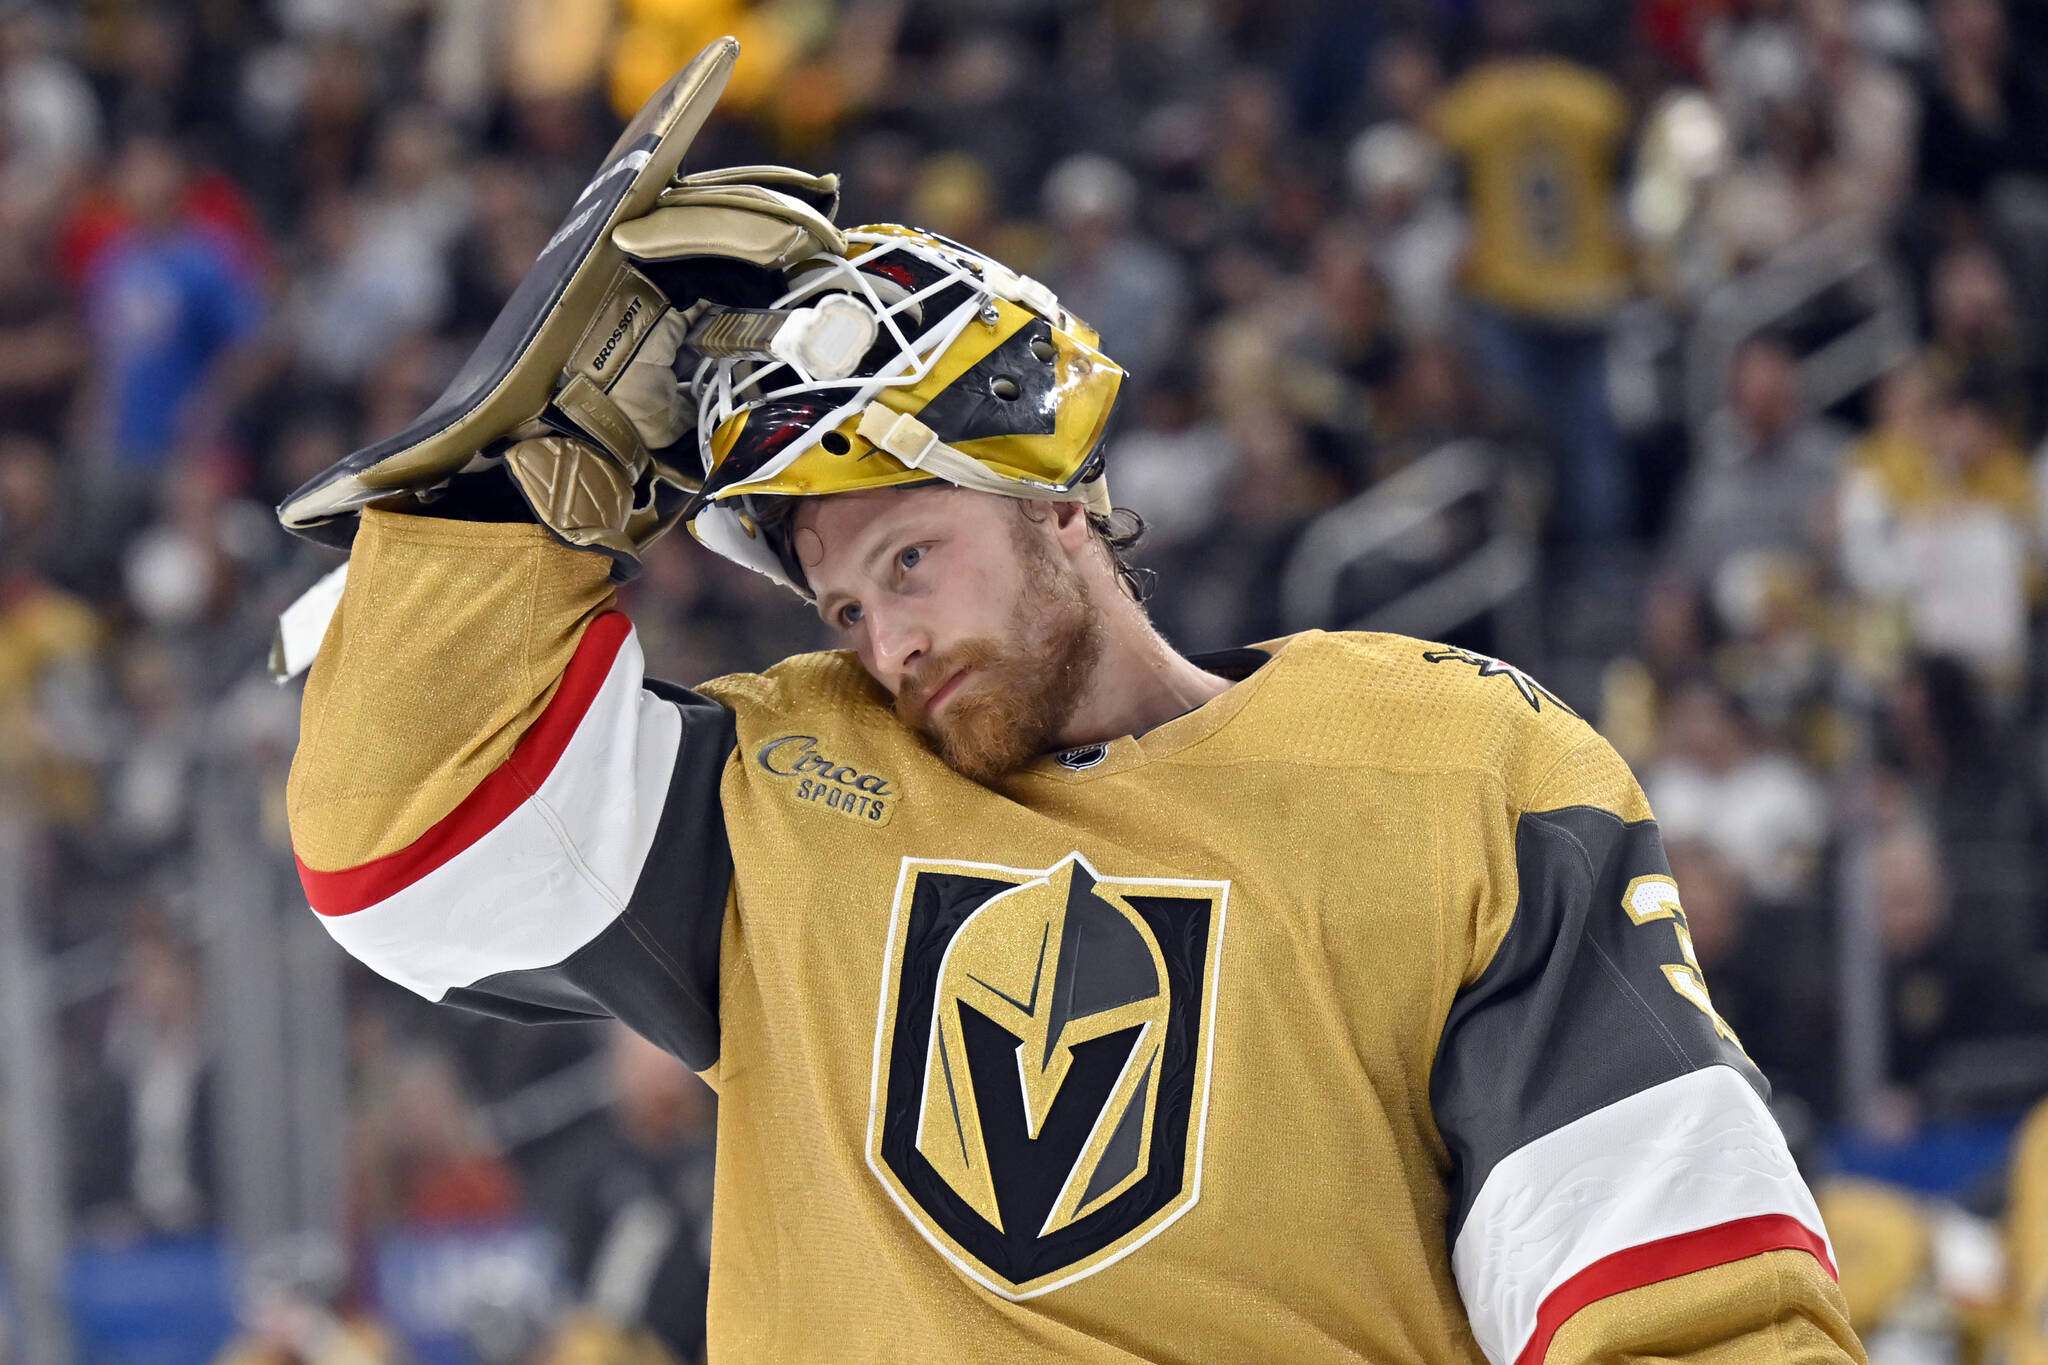 Vegas Golden Knights goaltender Laurent Brossoit adjusts his helmet during the third period of Game 5 of the team’s NHL hockey Stanley Cup first-round playoff series against the Winnipeg Jets on Thursday, April 27, 2023, in Las Vegas. (AP Photo/David Becker)